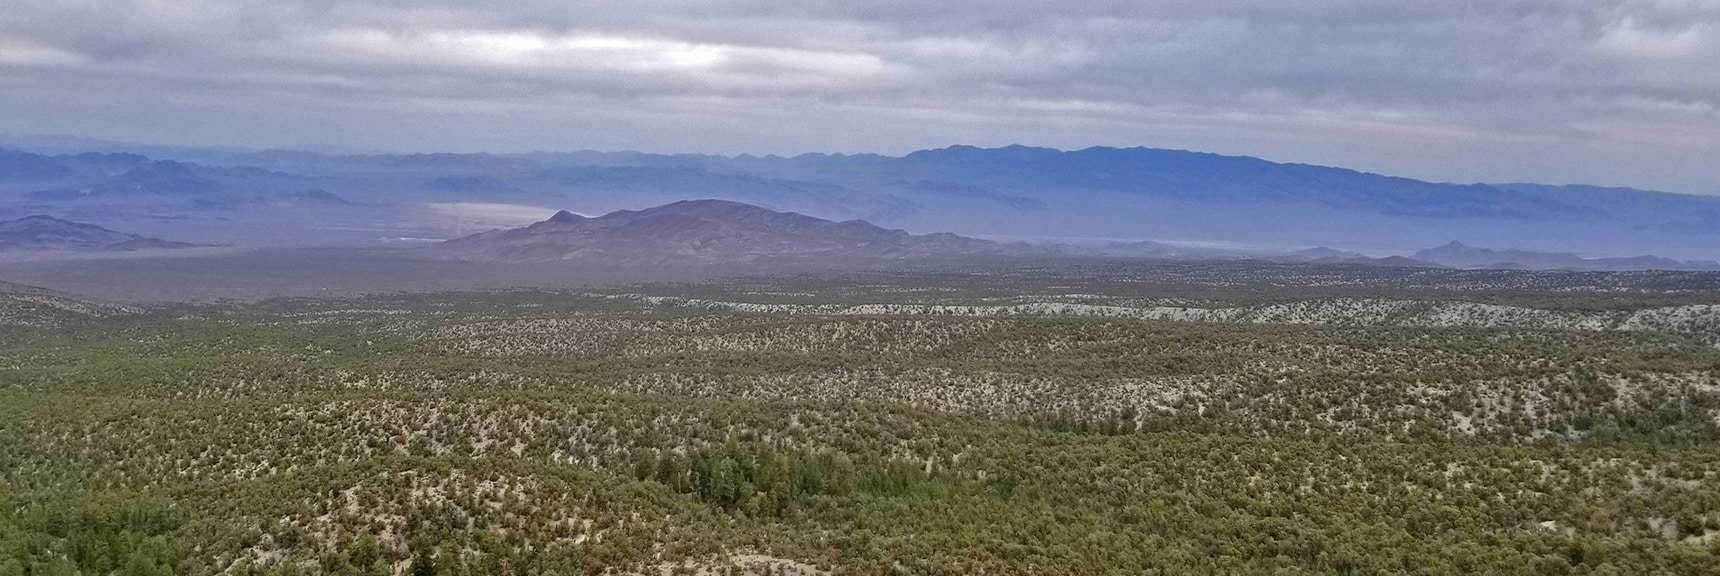 Hwy 95 Corridor Desert Valley Viewed from 9,235ft High Point Bluff | Sawmill Trail to McFarland Peak | Spring Mountains, Nevada